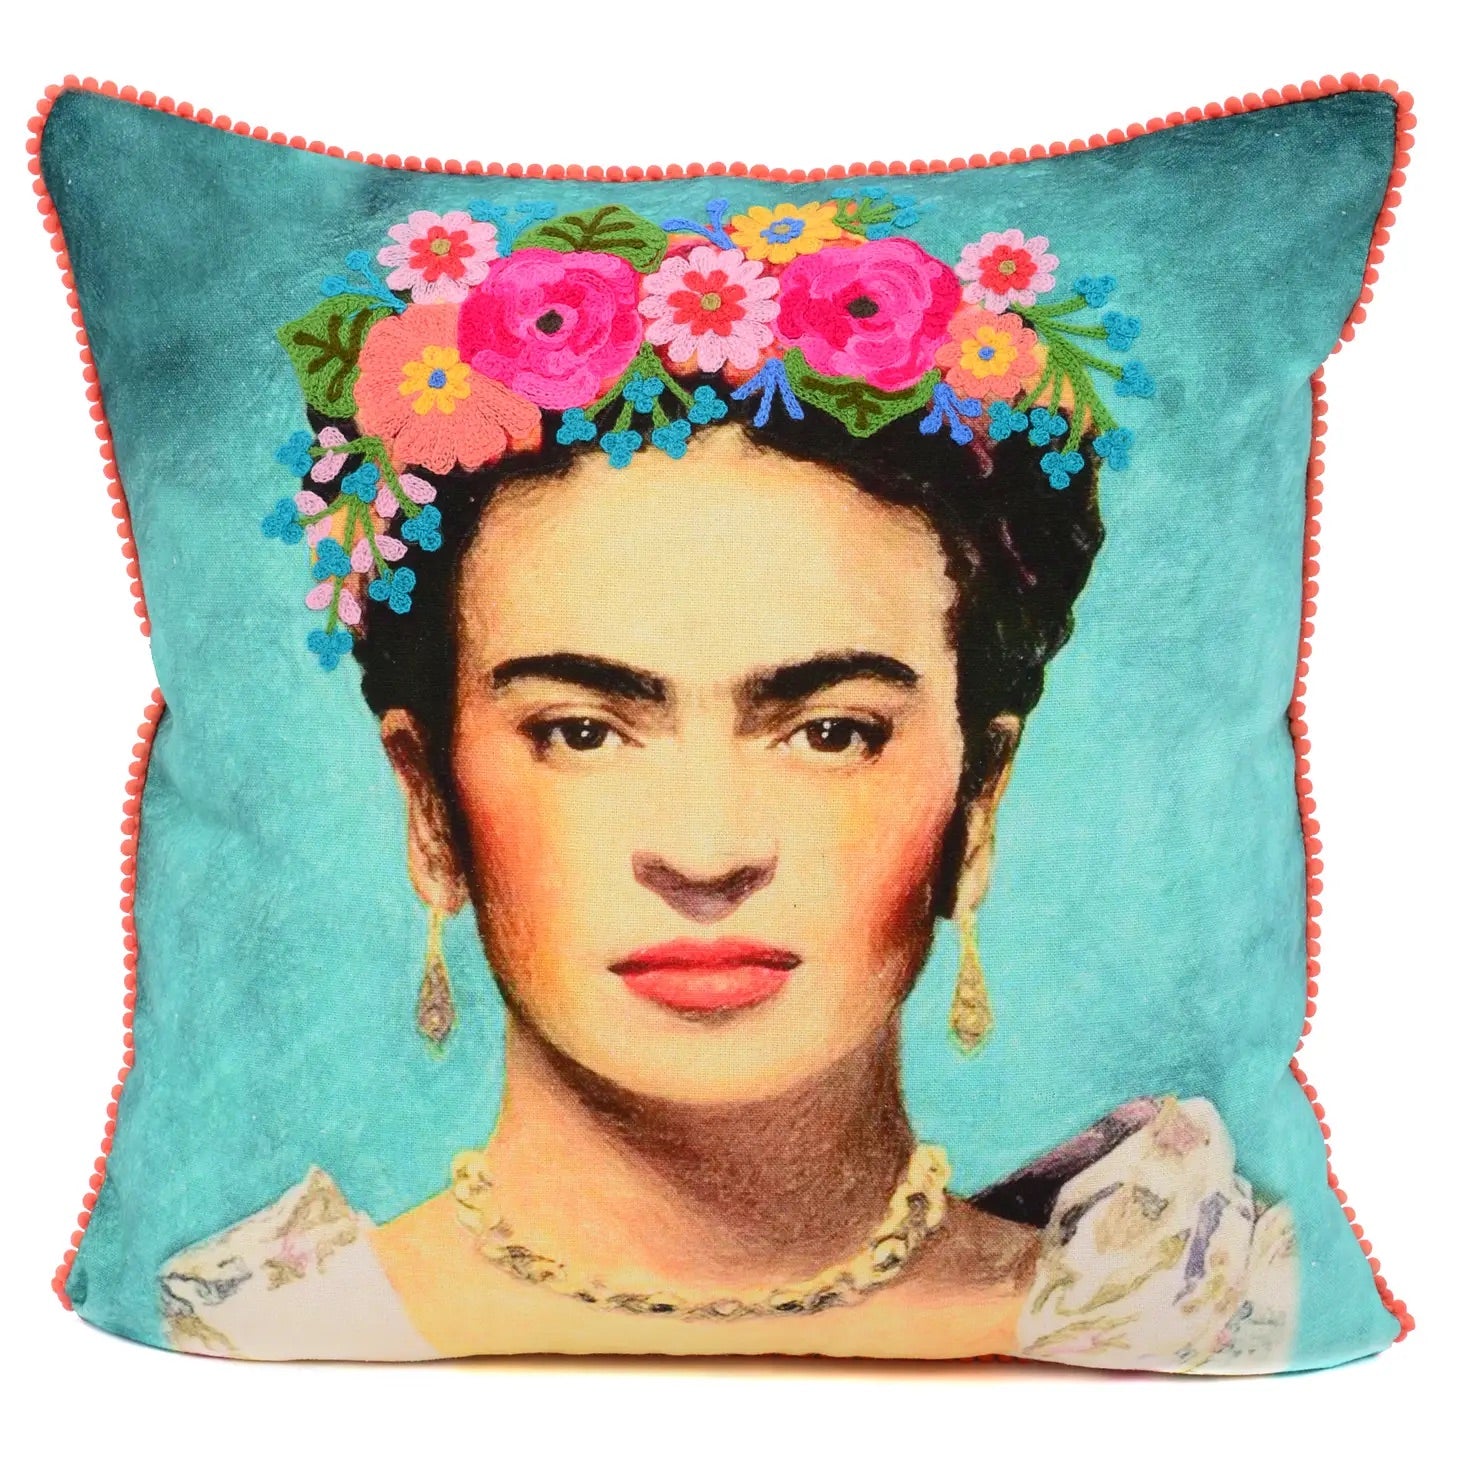 Hand embroidered teal pillow with an illustration of Frida Kahlo with a wreath of flowers in different colors on her head. In the image, she is wearing a gold necklace and earrings and a white blouse.